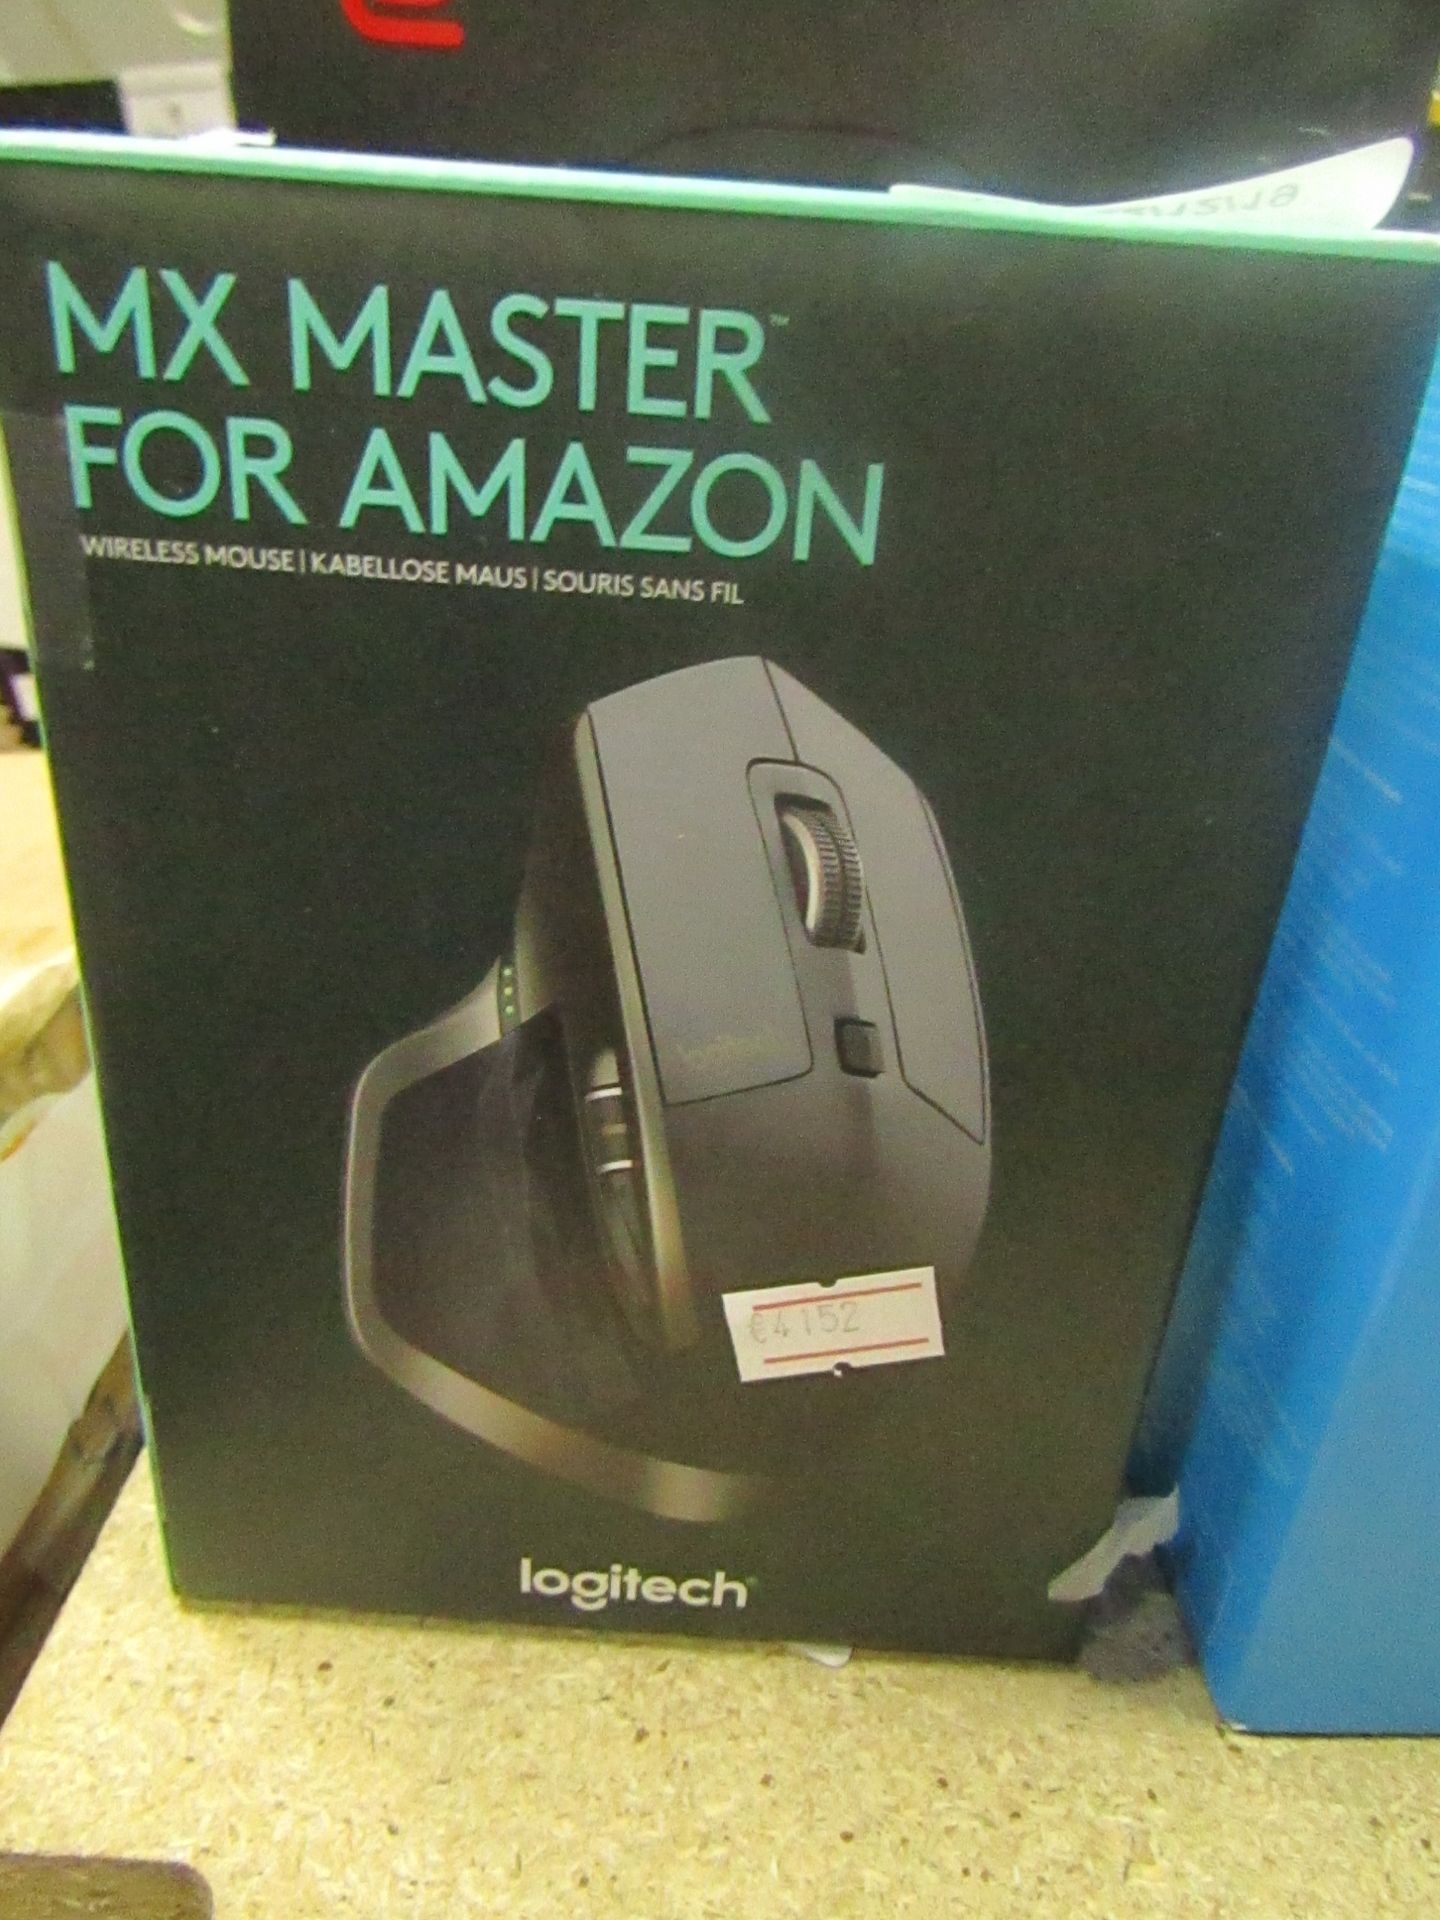 MX Master for Amazon wireless mouse, untested and boxed.